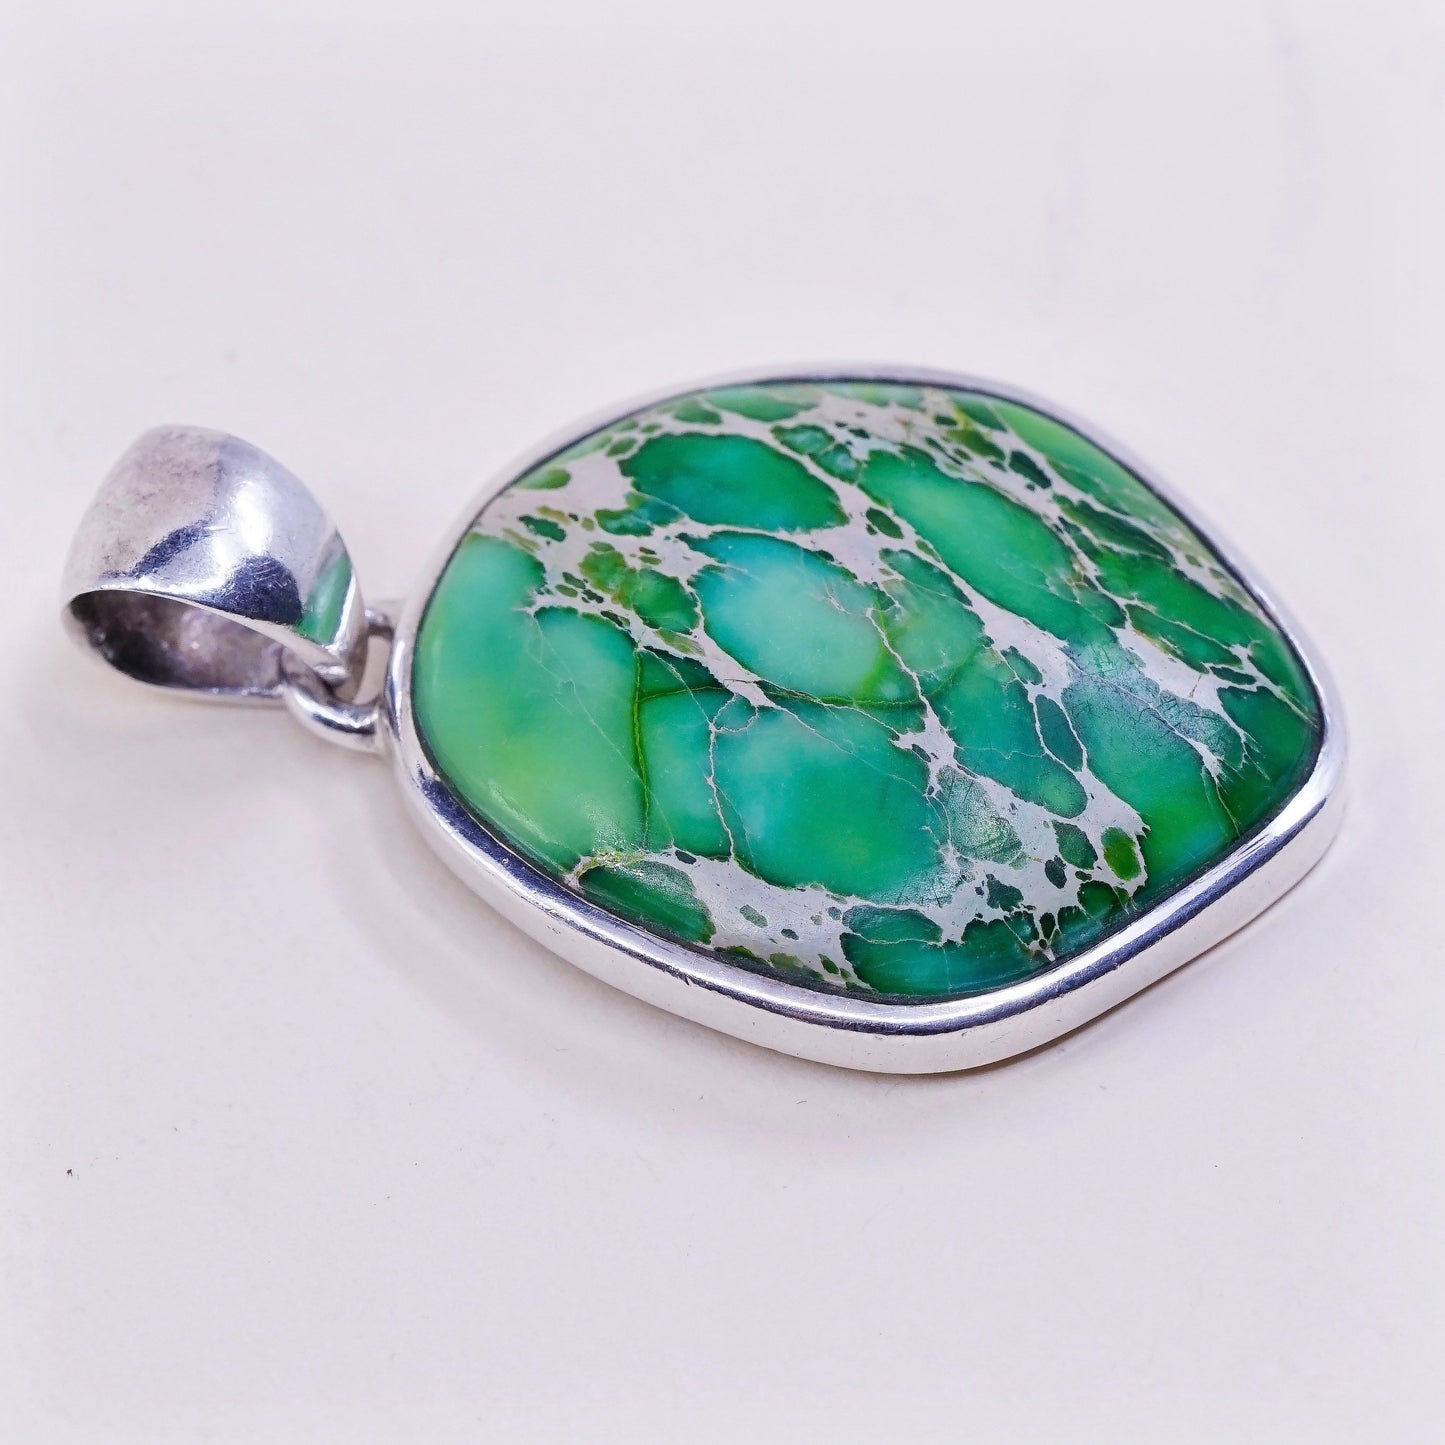 Sterling silver handmade pendant, Mexican 925 w/ Carioca lake turquoise